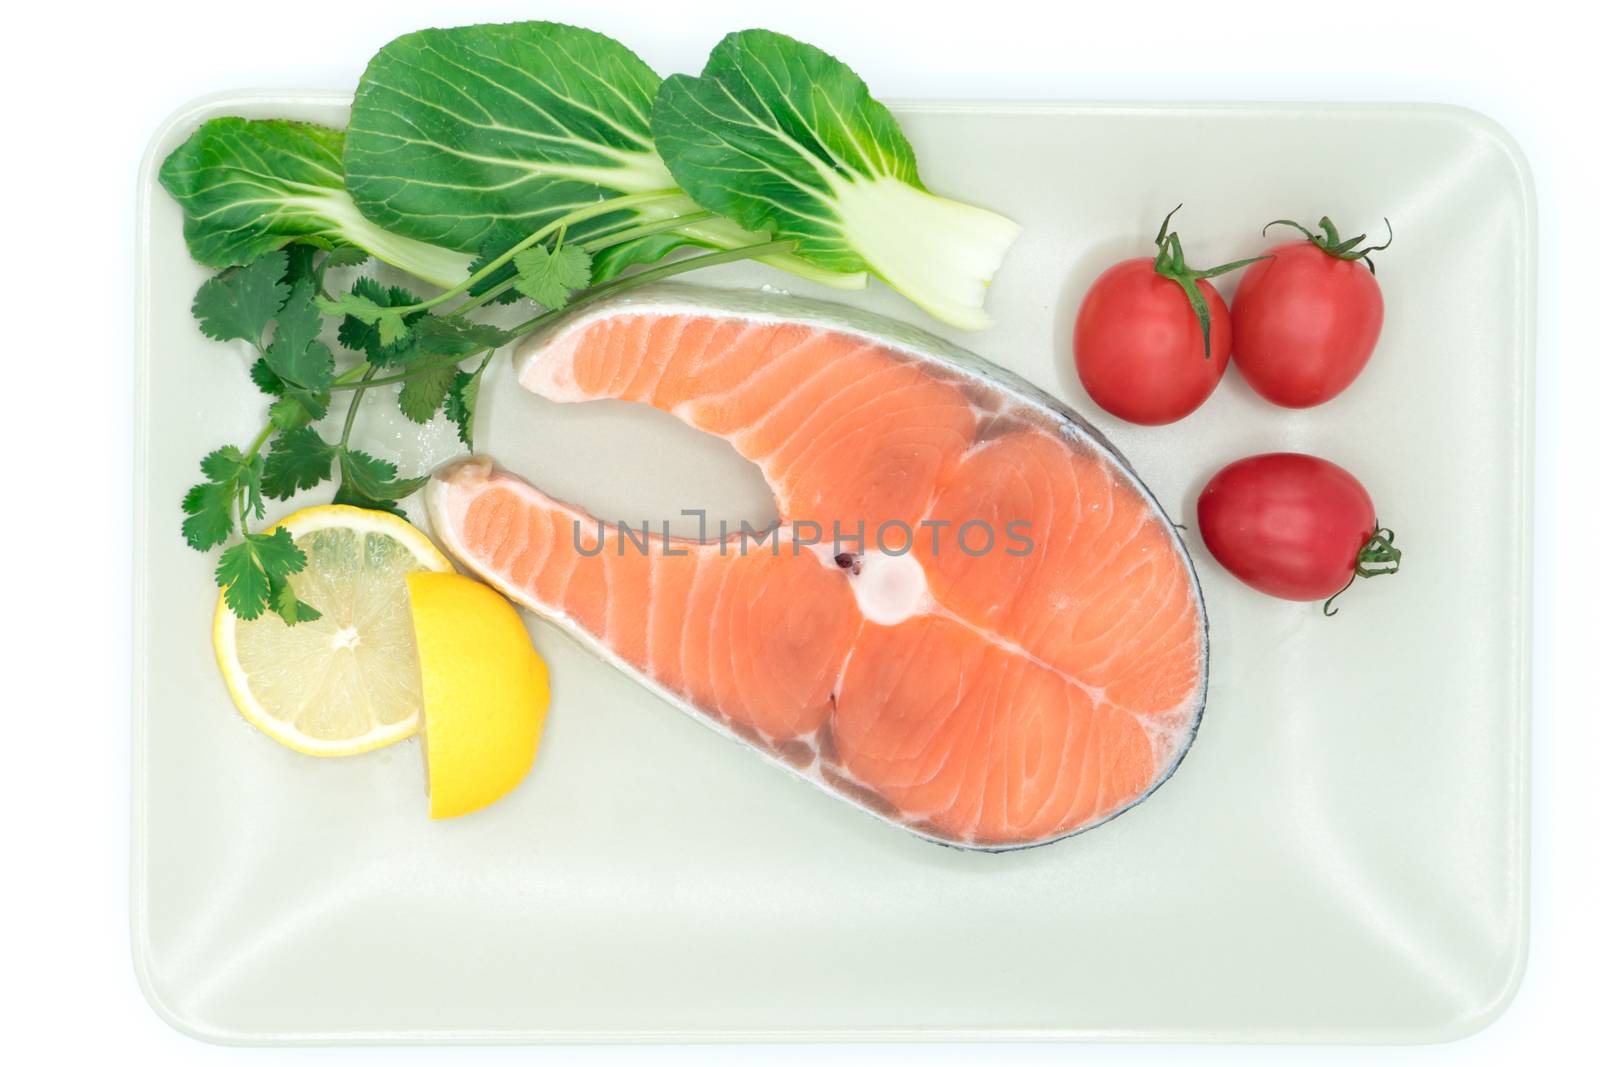 raw salmon steak with vegetable on plate, food and vegetable concept